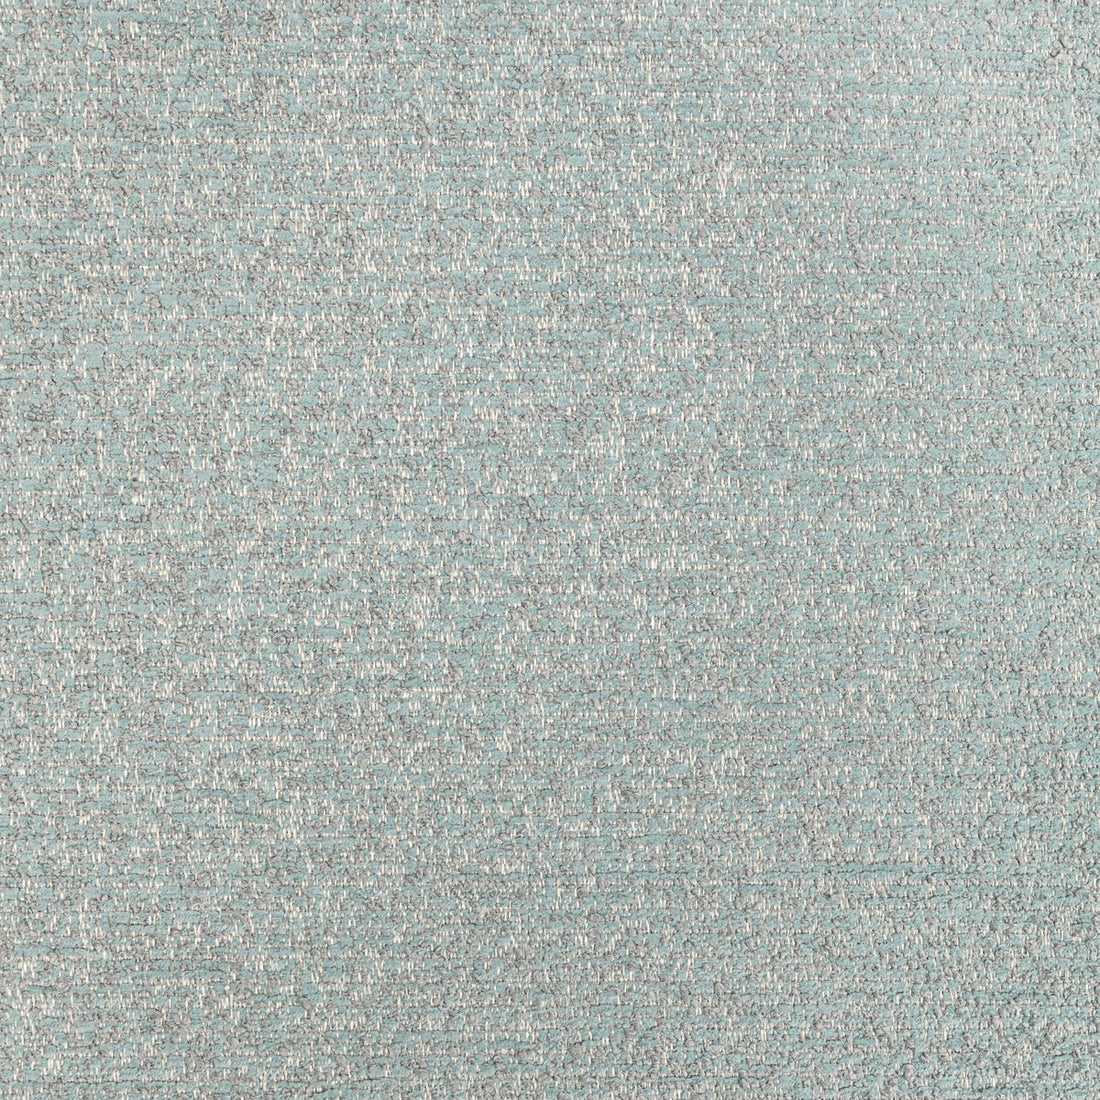 Serenity Now fabric in soothing spa color - pattern 36390.316.0 - by Kravet Design in the Crypton Home - Celliant collection